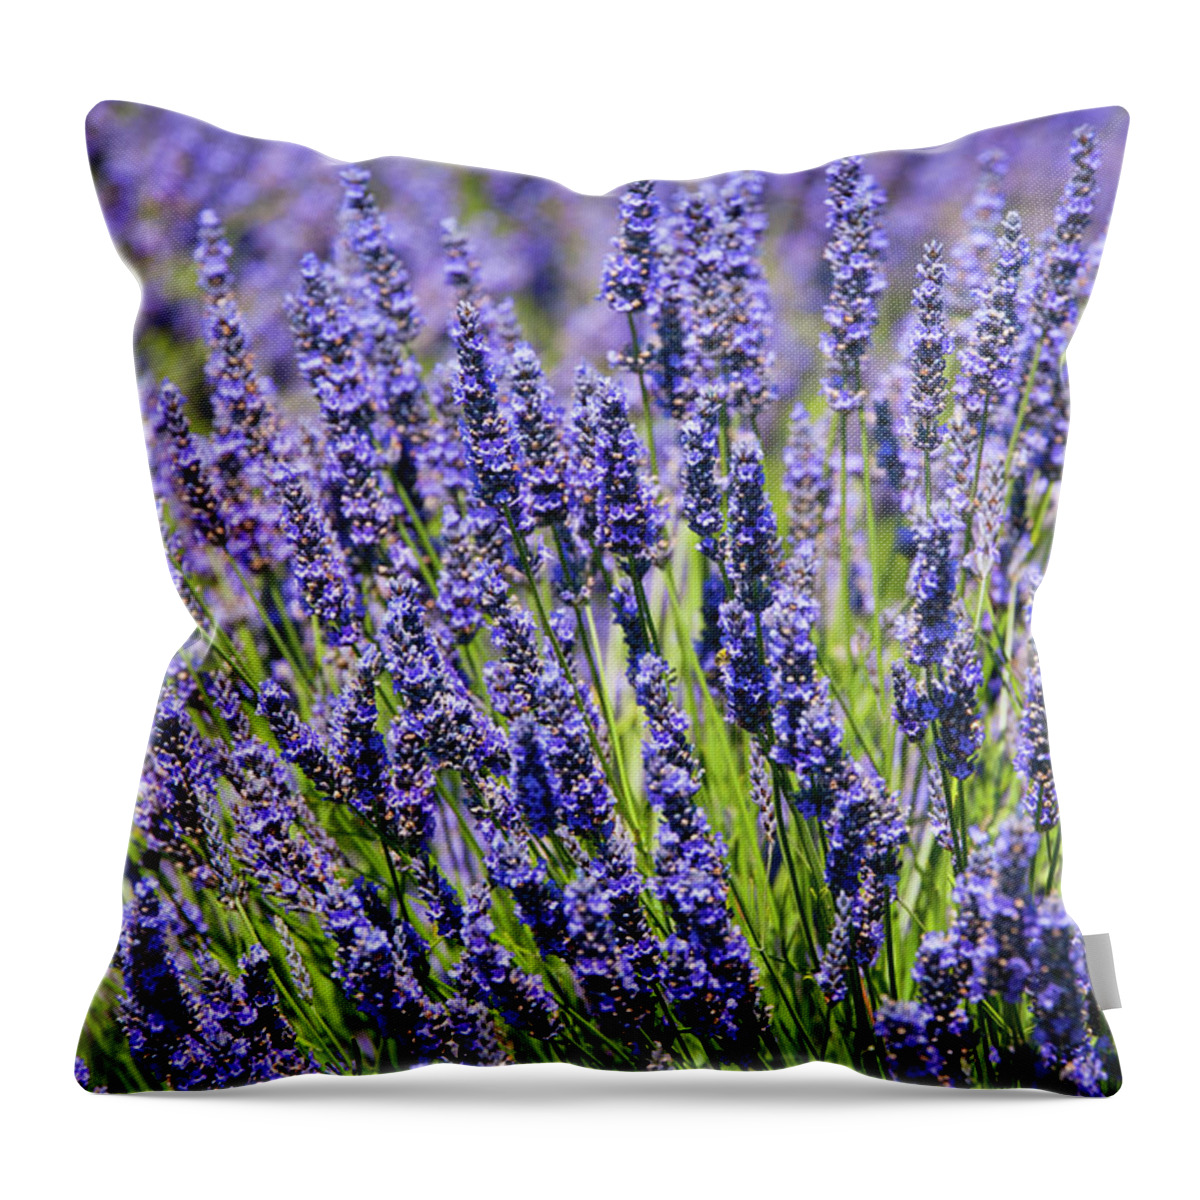 Washington Throw Pillow featuring the photograph Whidbey Lavender Close-up by Tara Krauss